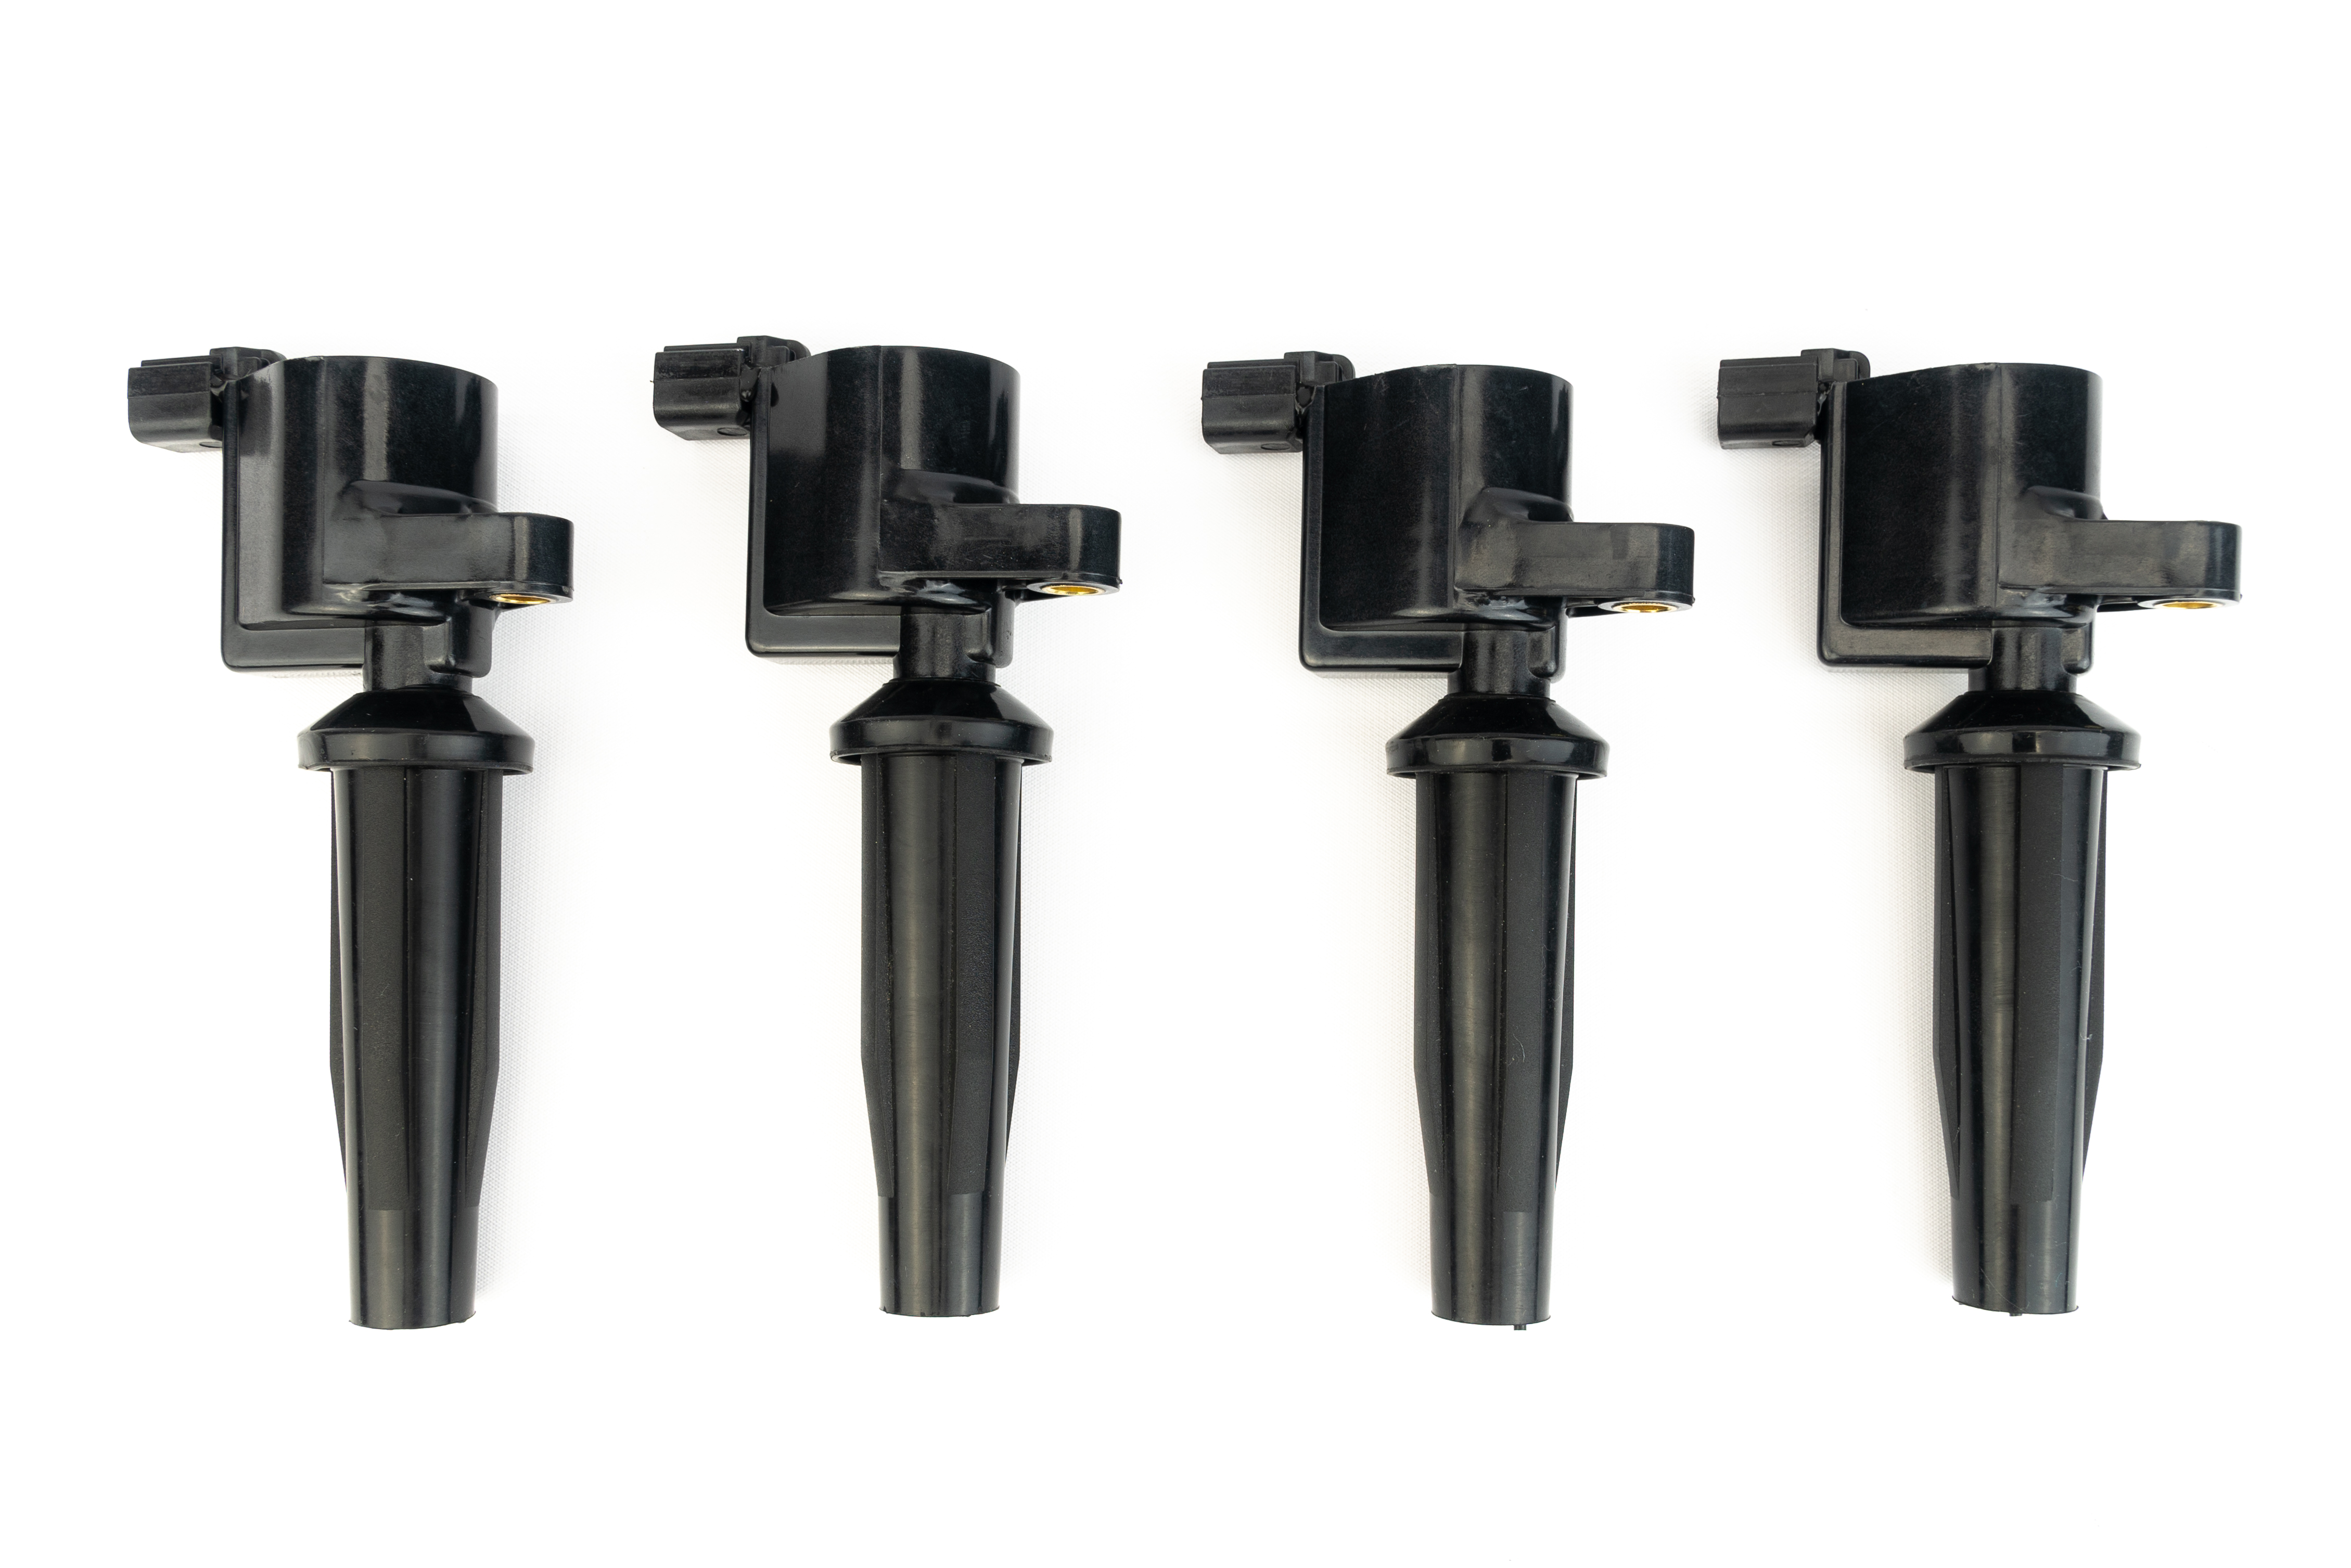 Ignition Coil Pack Set of 4 - Replaces# DG541 - Fits Ford & Mercury Vehicles Image